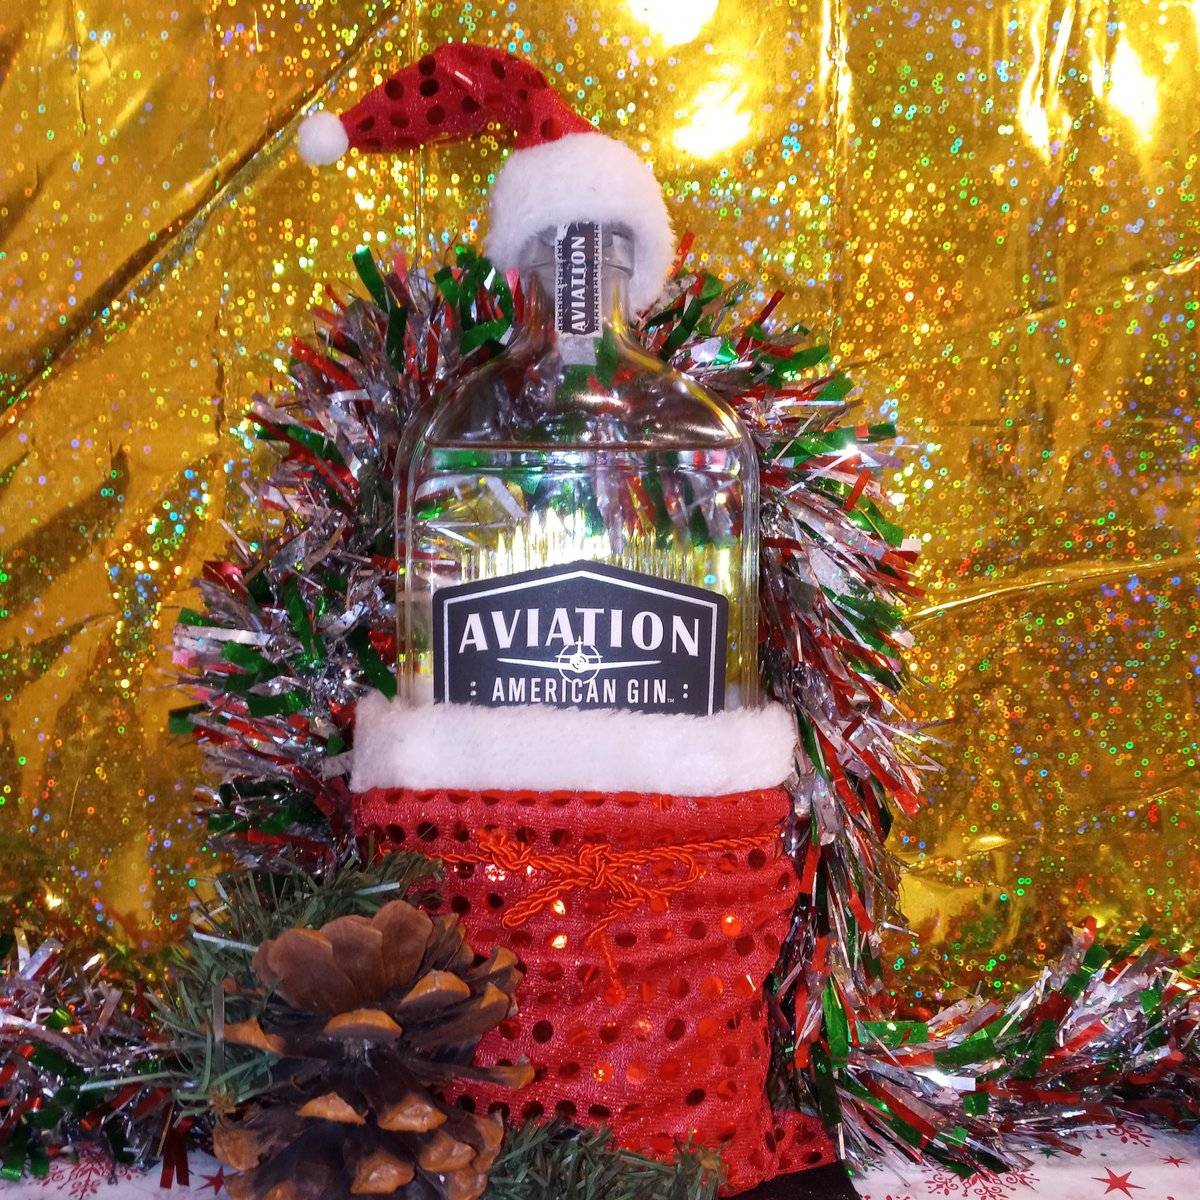 @AviationGin is the gift that keeps on giving....because you can always get more BEFORE YOU RUN OUT! (@VancityReynolds notice how I stressed the before you run out😉)
#bestgiftever #secretsantagift